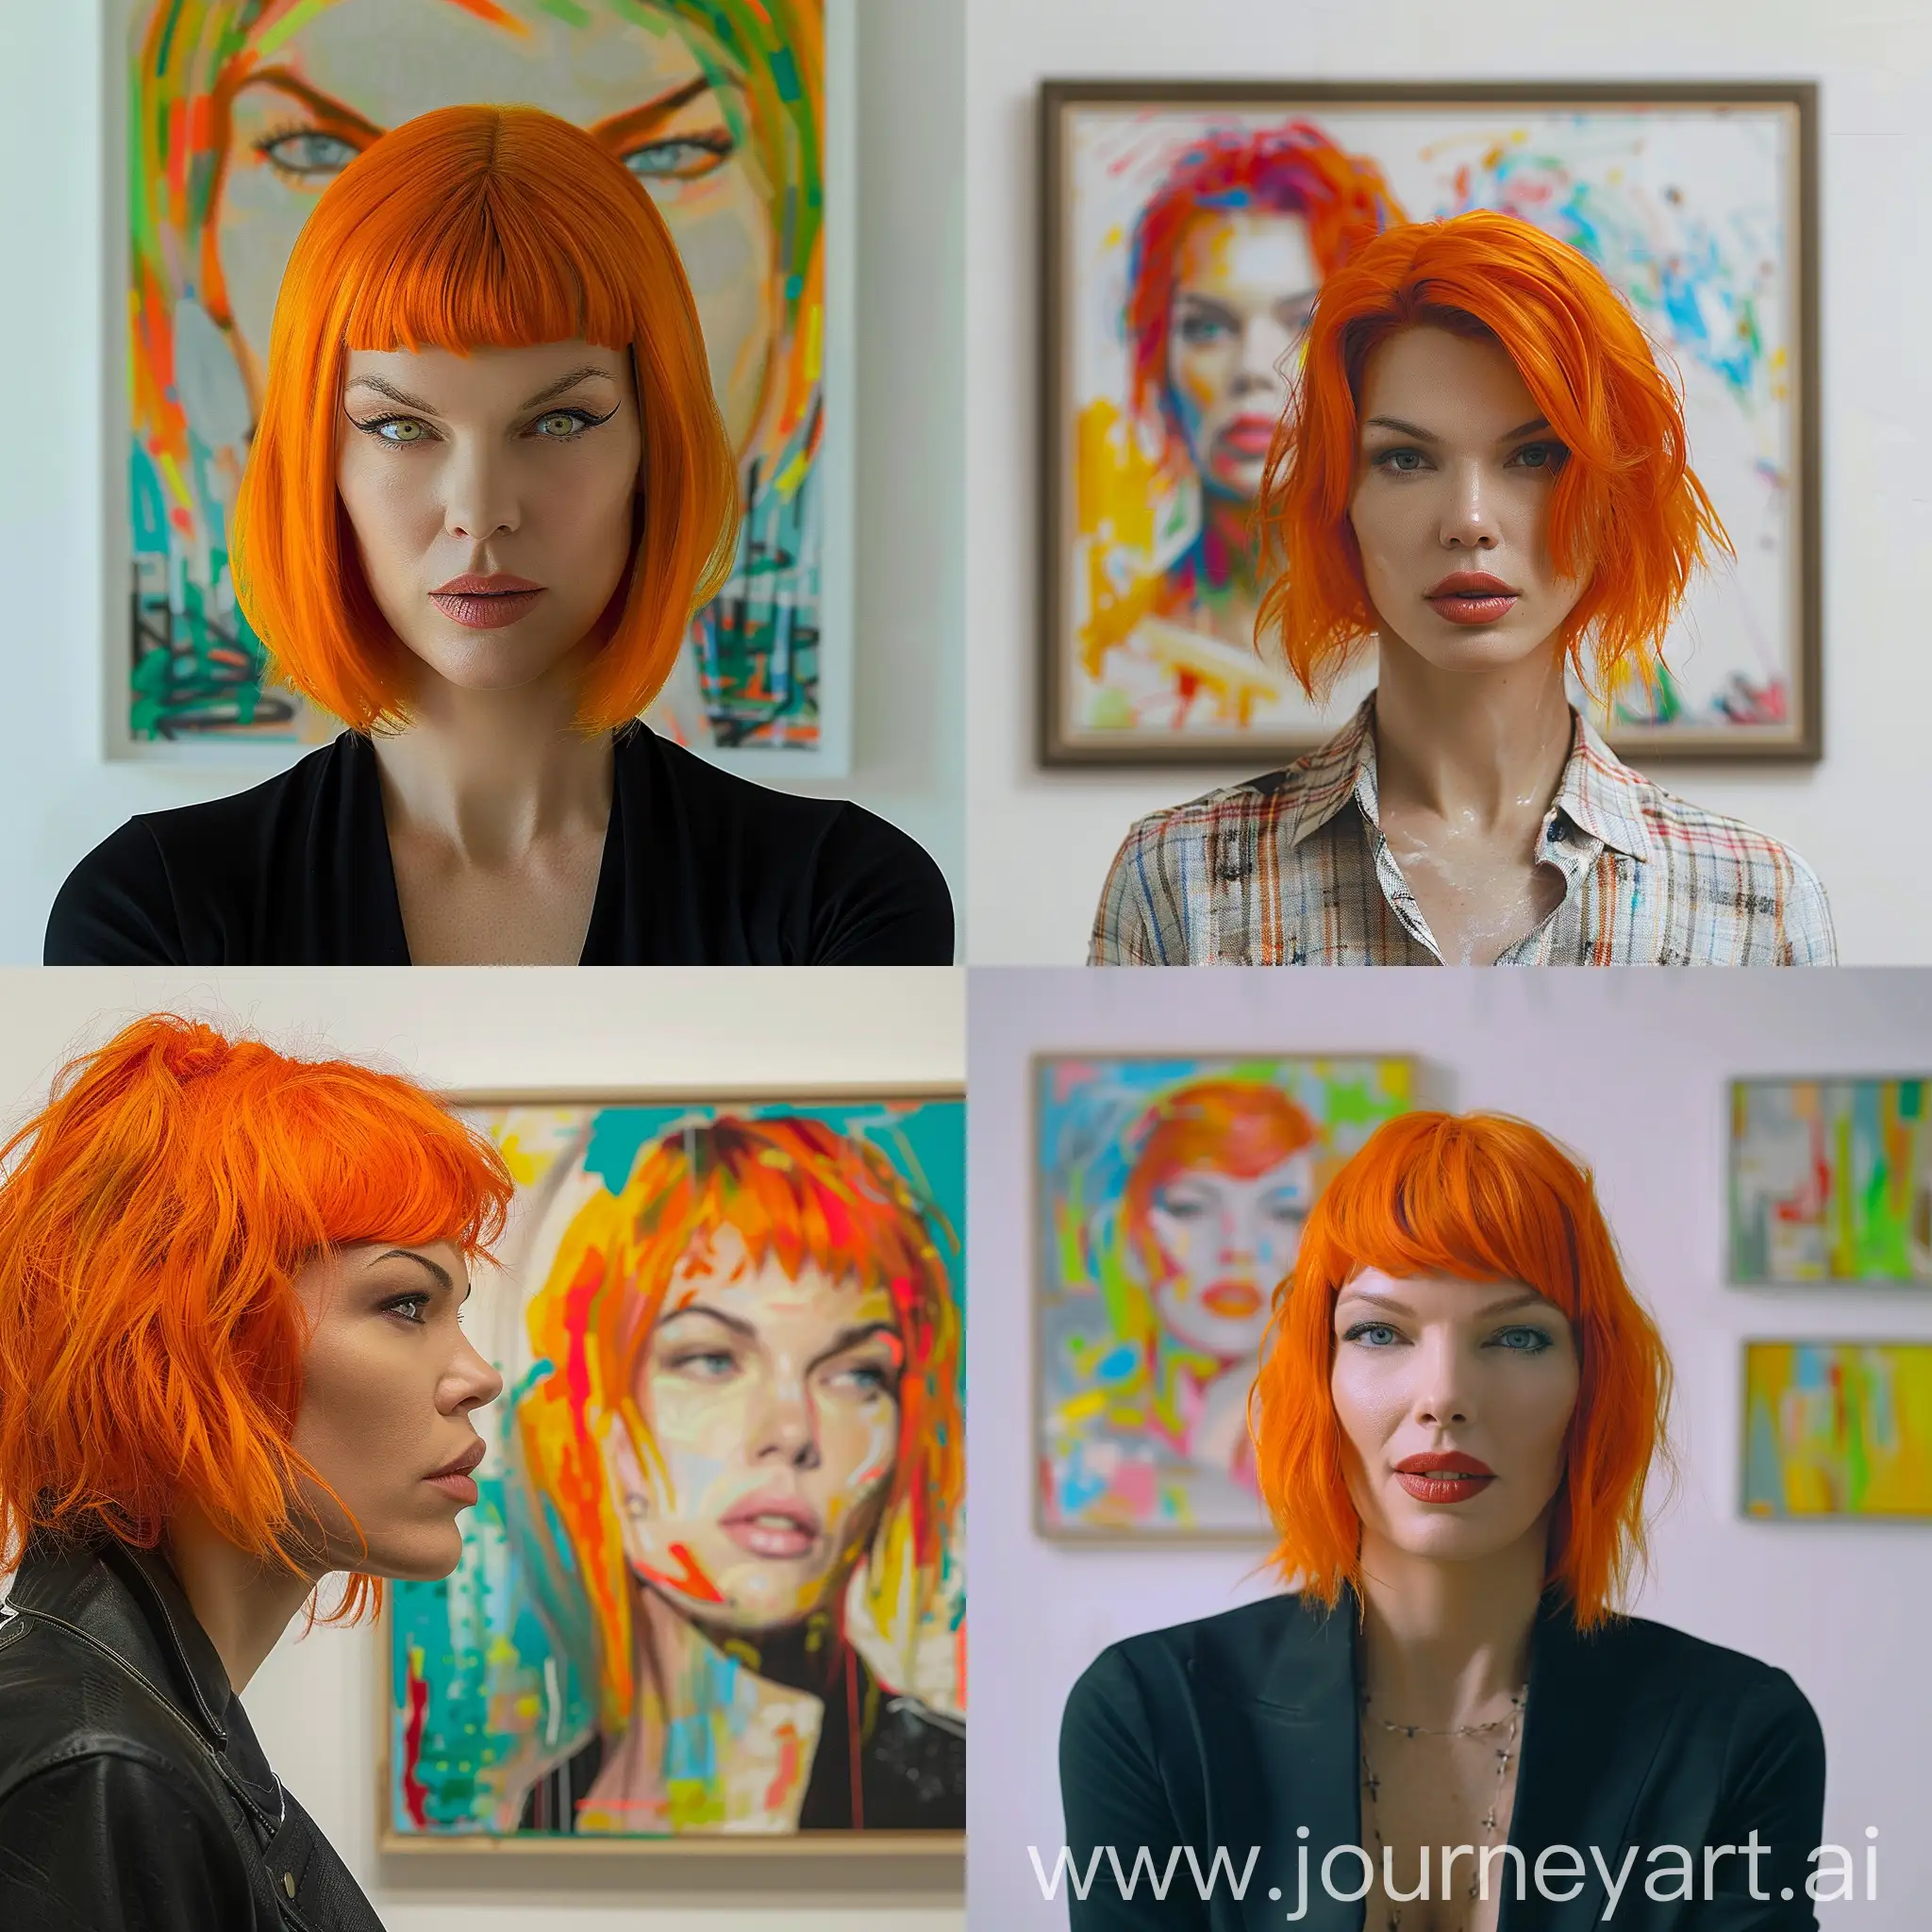 Milla Jovovich, in the role of Lilu, the heroine of the film The Fifth Element, with orange hair, looks straight at a waist-high portrait, pop art style, on a white background,painting style, expressionism, bright colors